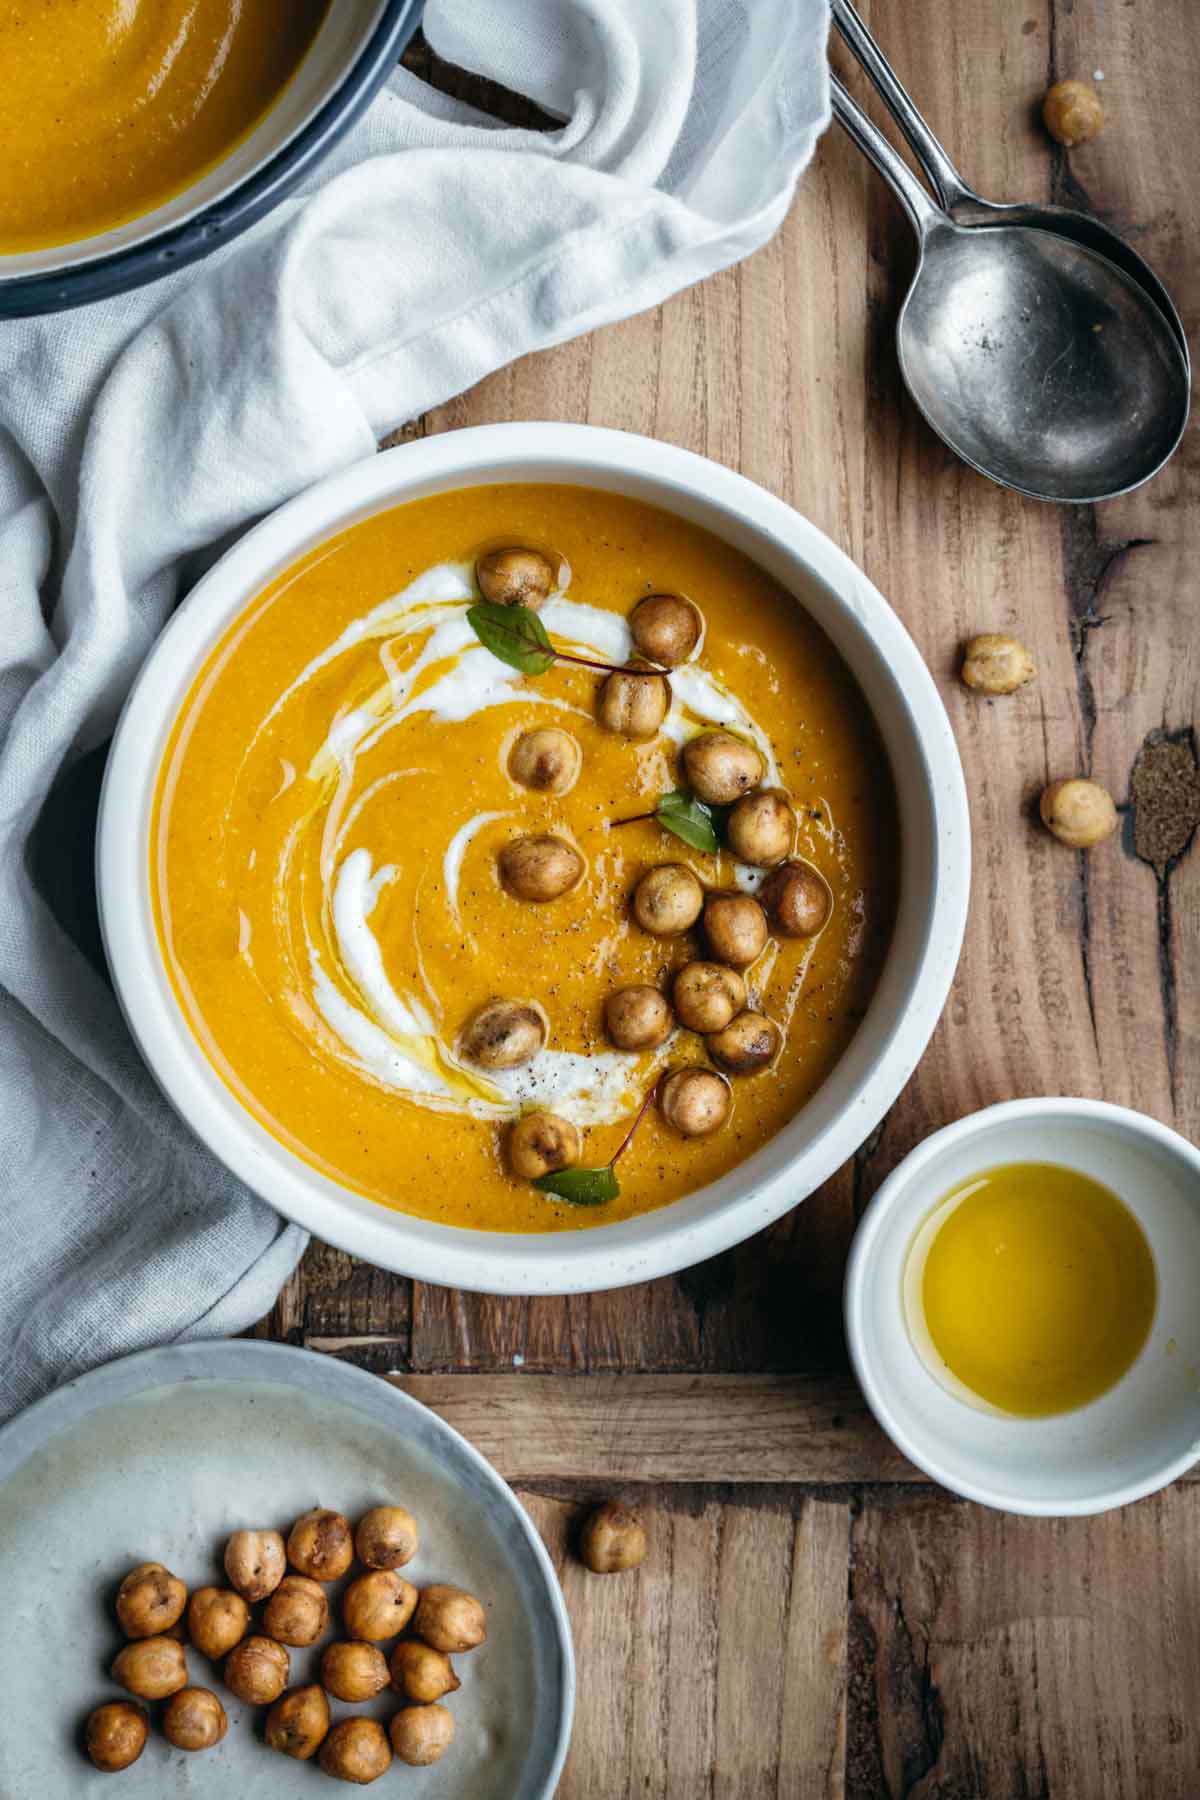 Bowls of pumpkin soup with crispy chickpea croutons.